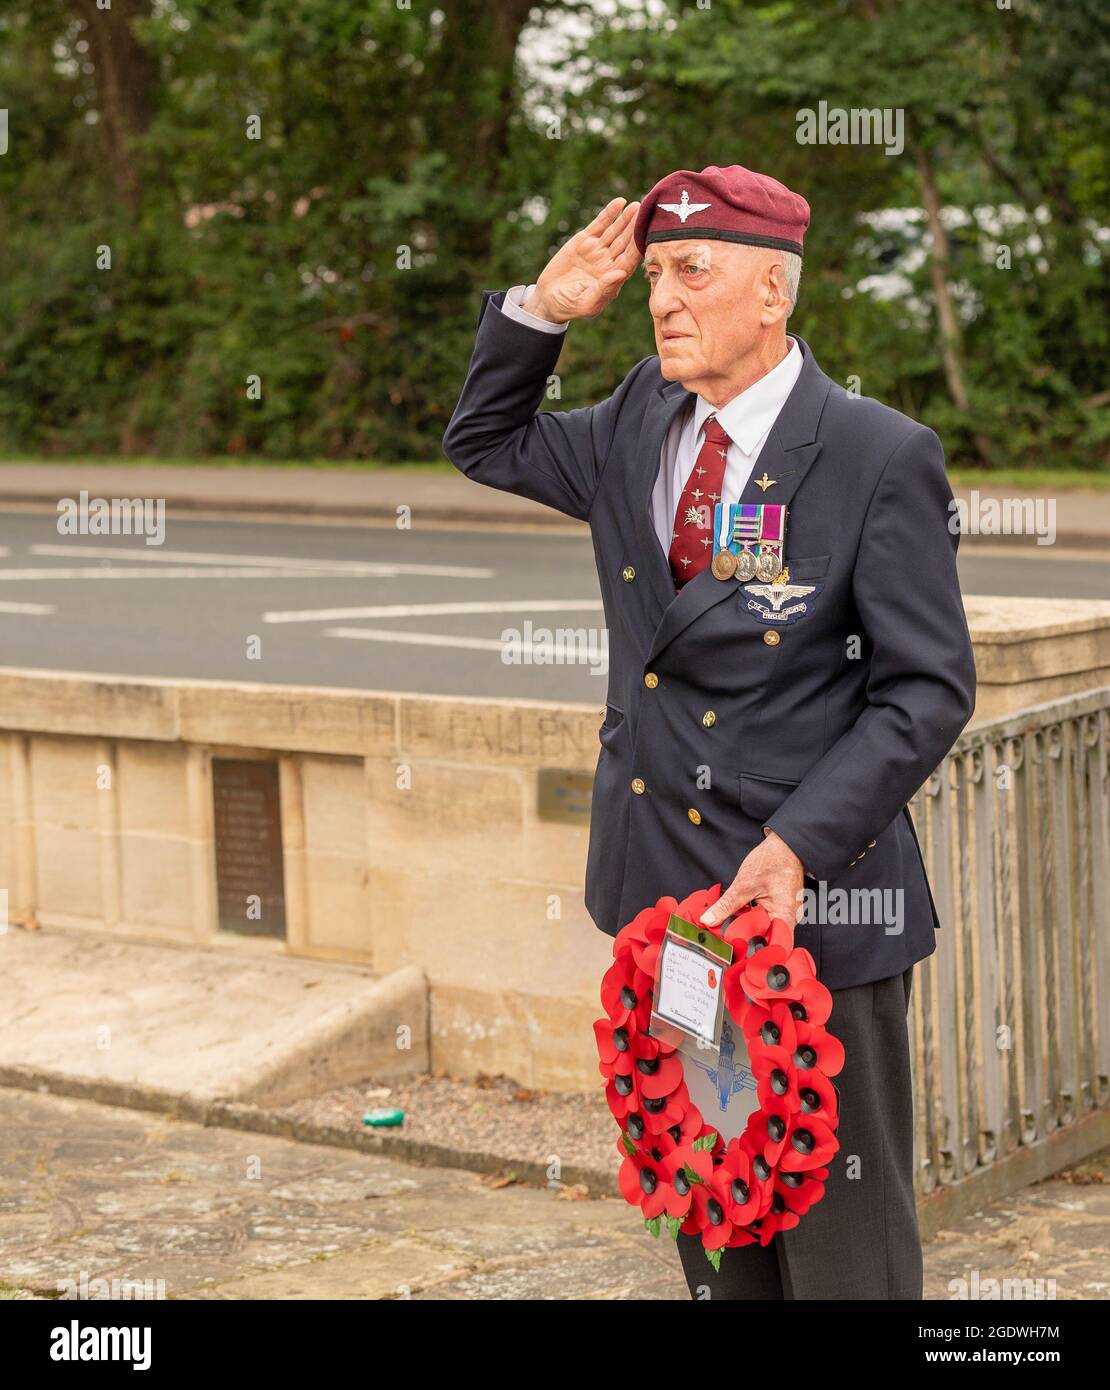 Brentwood, UK. 15th Aug, 2021. Brentwood Essex 15th August 2021 John Pinkerton, late of the Parachute Regiment, in solitary commemoration of VJ Day at the War Memorial, Brentwood Essex Credit: Ian Davidson/Alamy Live News Stock Photo